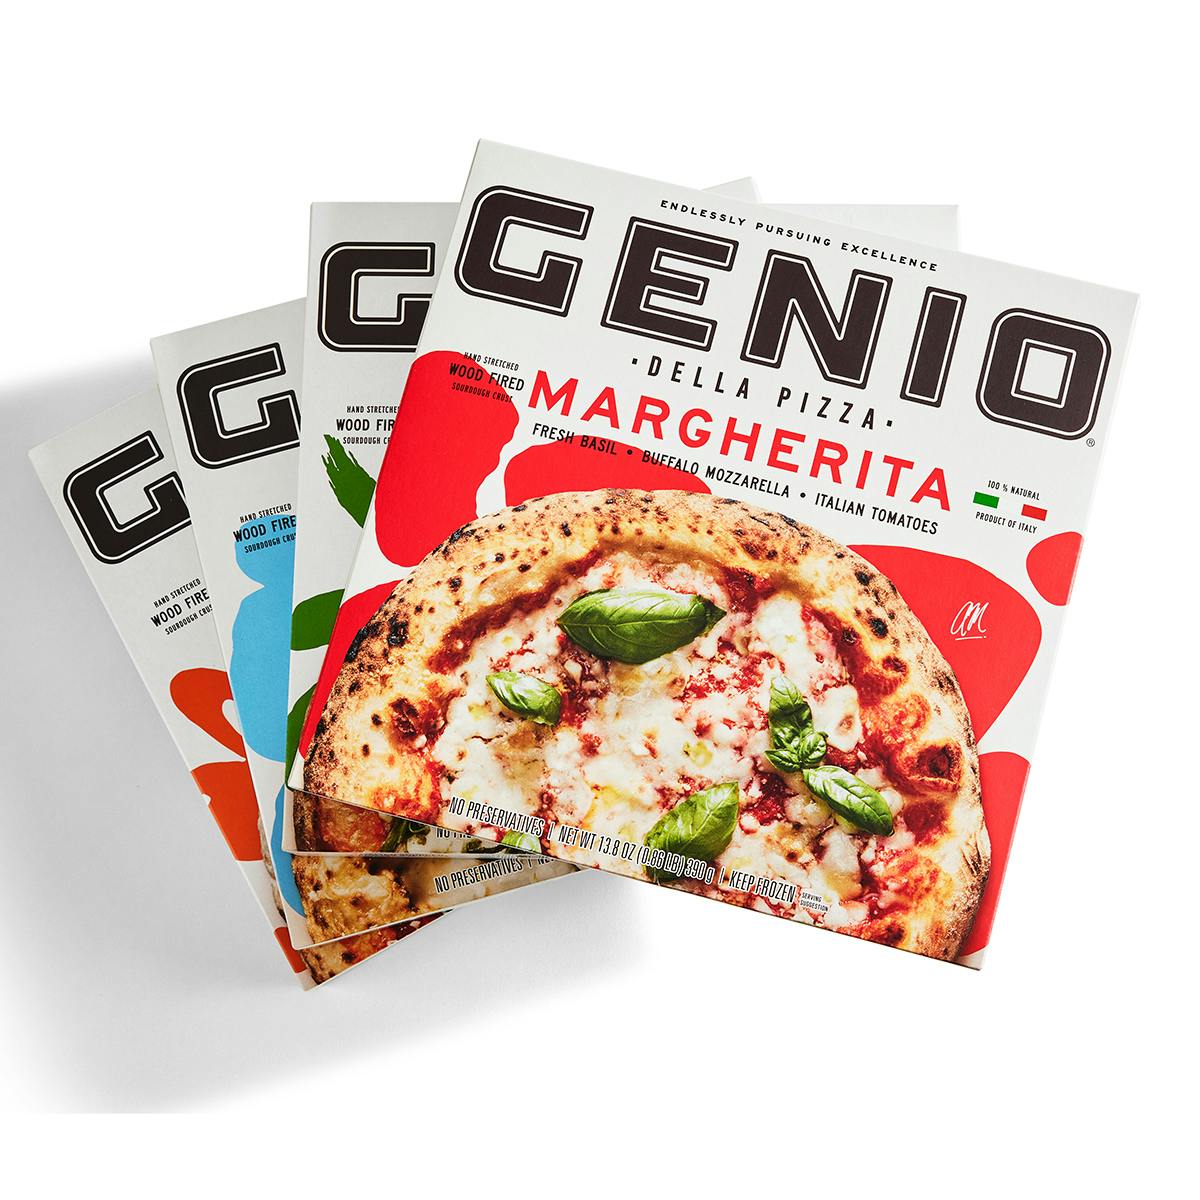 Wood-Fired Pizza - Choose Your Own 6 Pack Genio Della Pizza